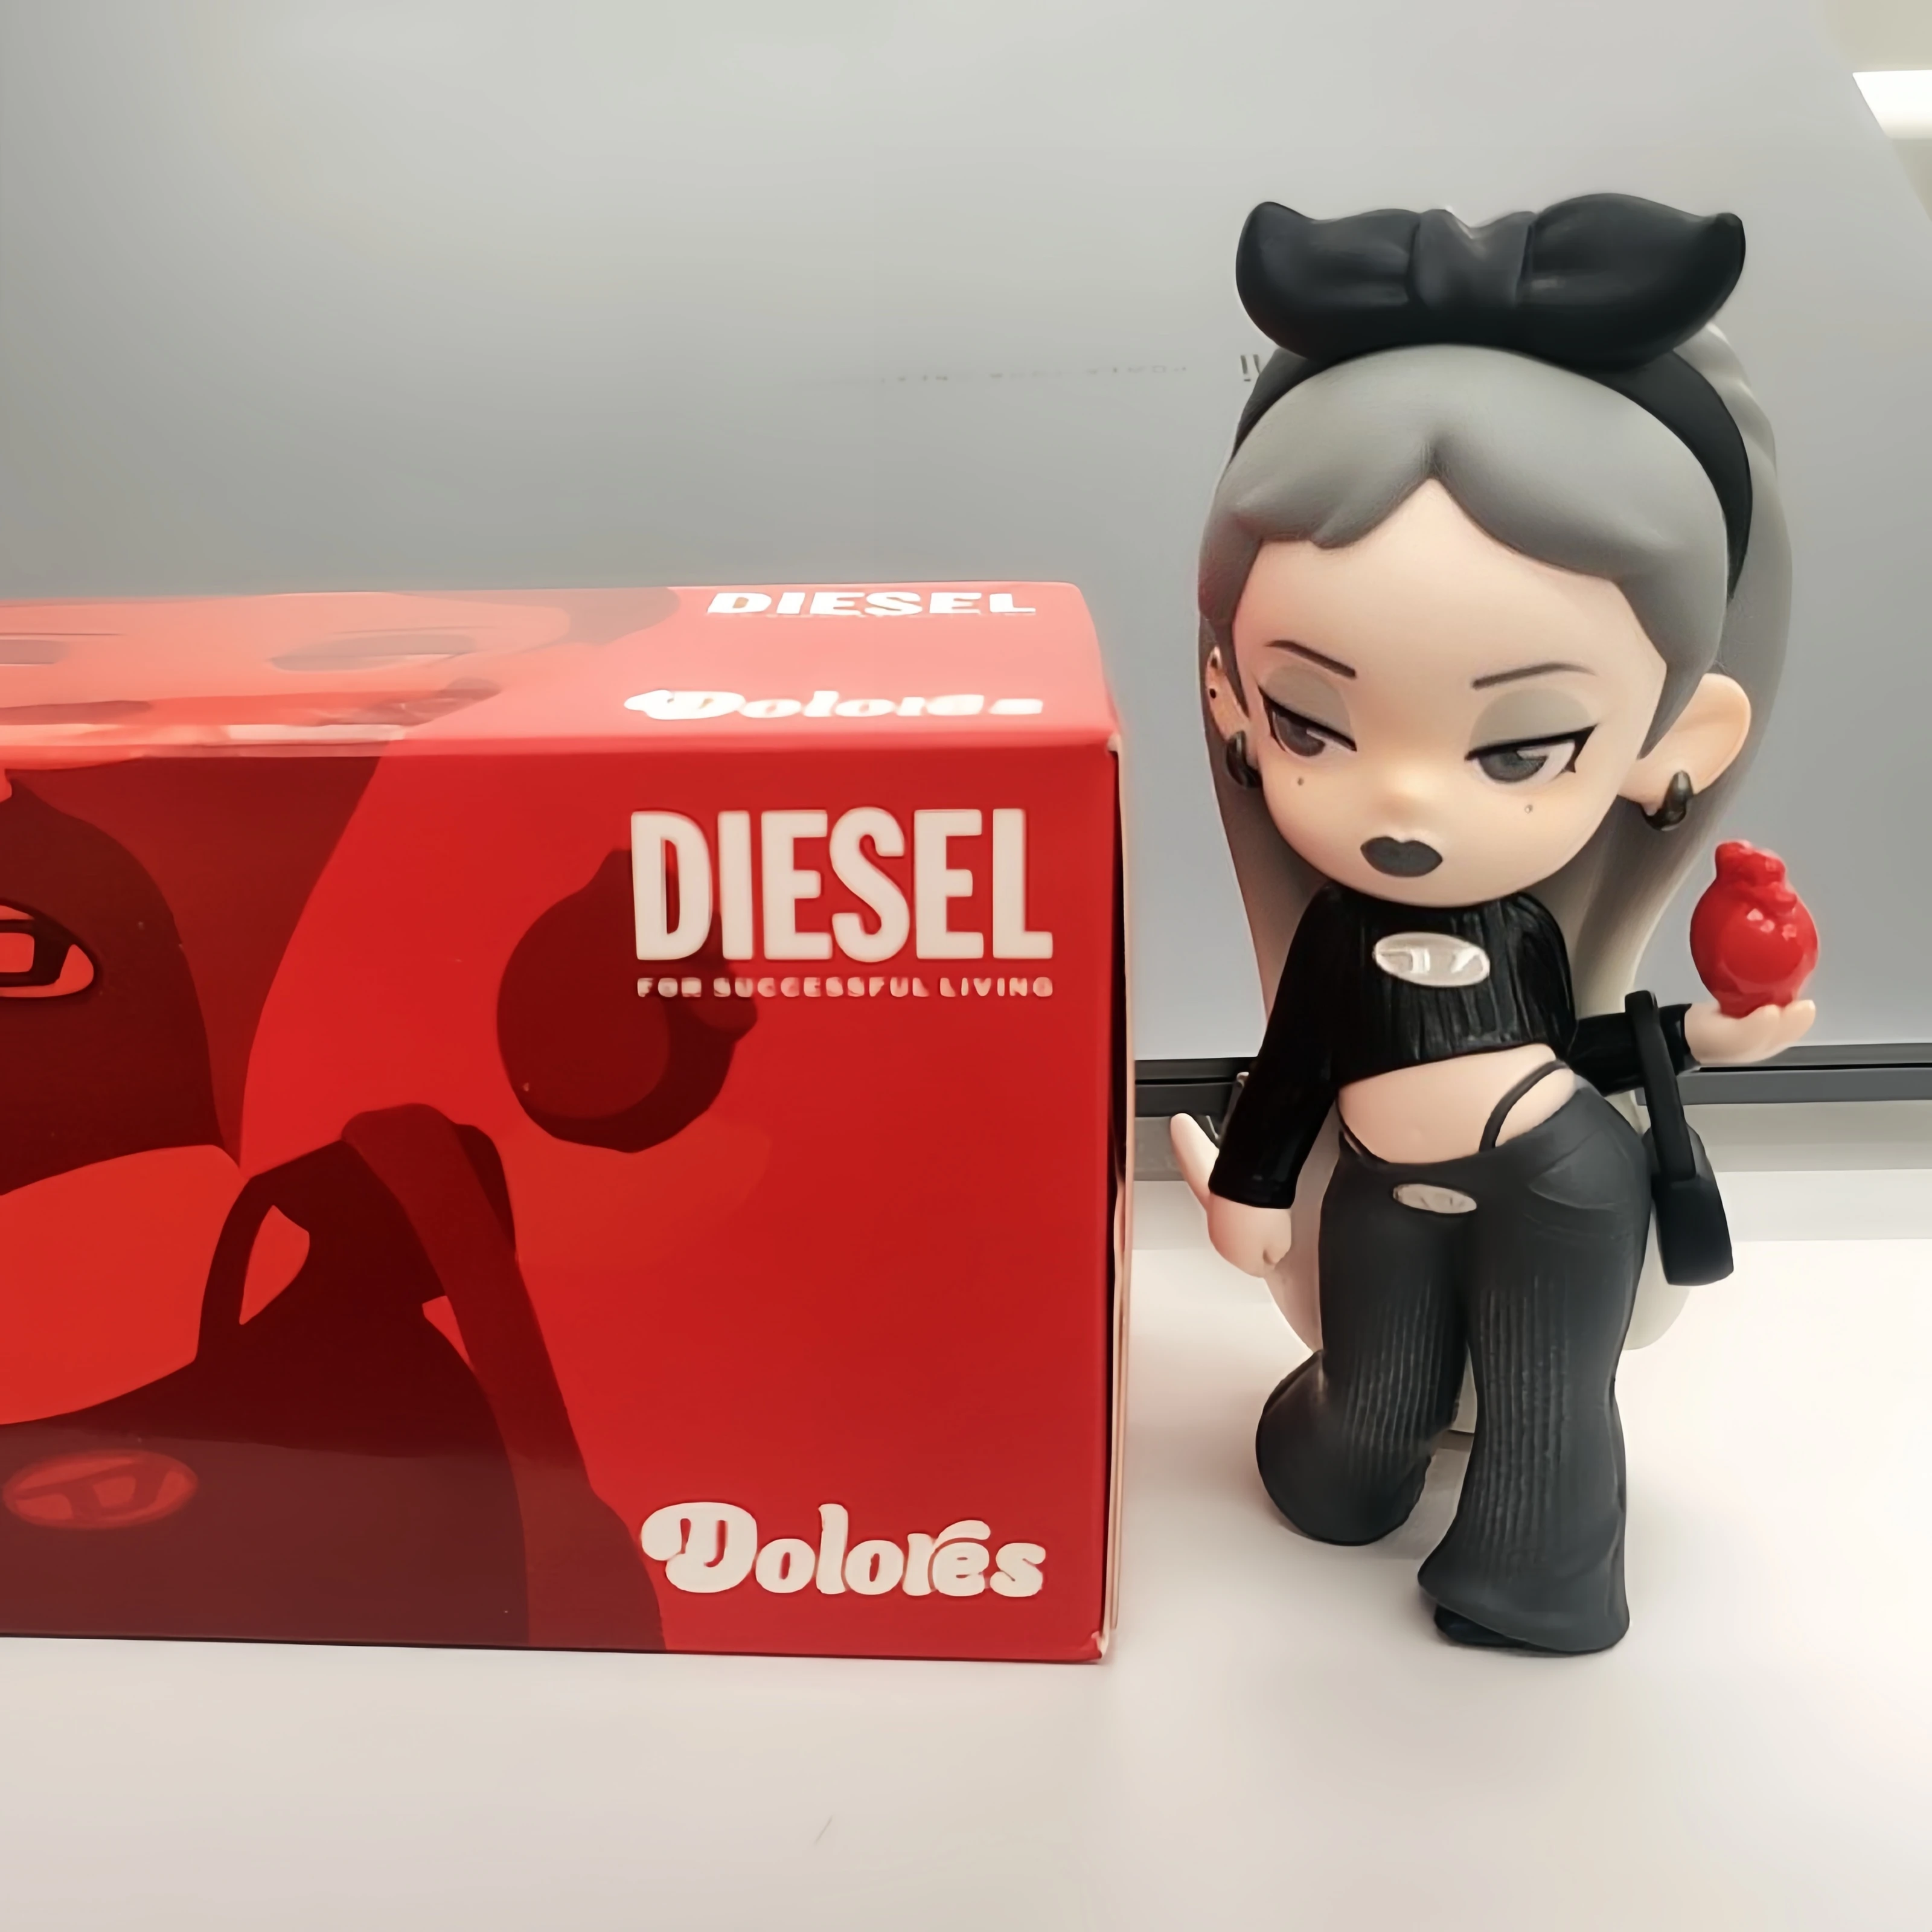 

Genuine Dolores Blind Box Anime Figure Cute Diesel Autumn/Winter Limited Secret Box Hand Model Doll Display Girl Decoration Gift